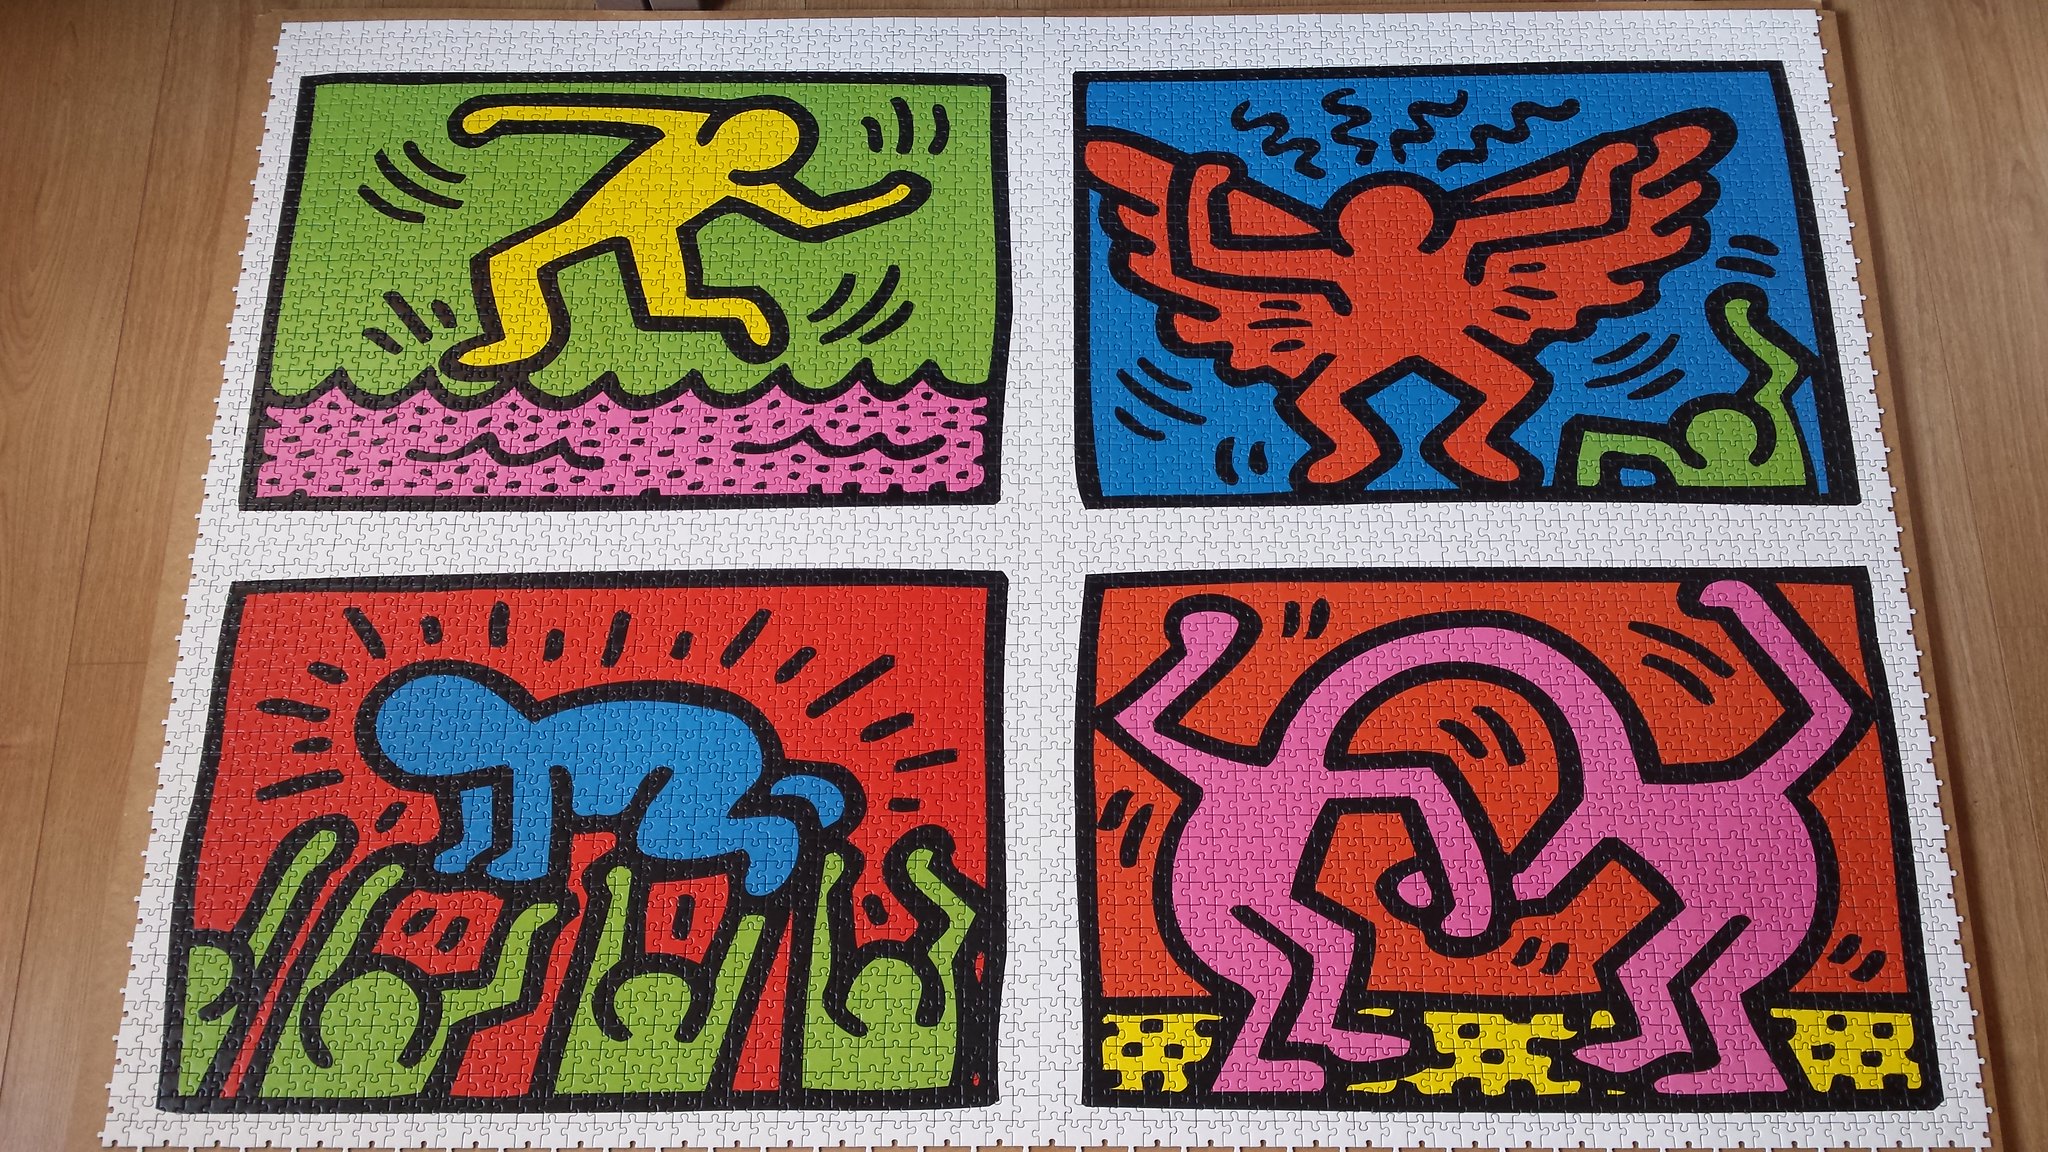 Re: Ravensburger 32000 Keith Haring: Double Retrospect.